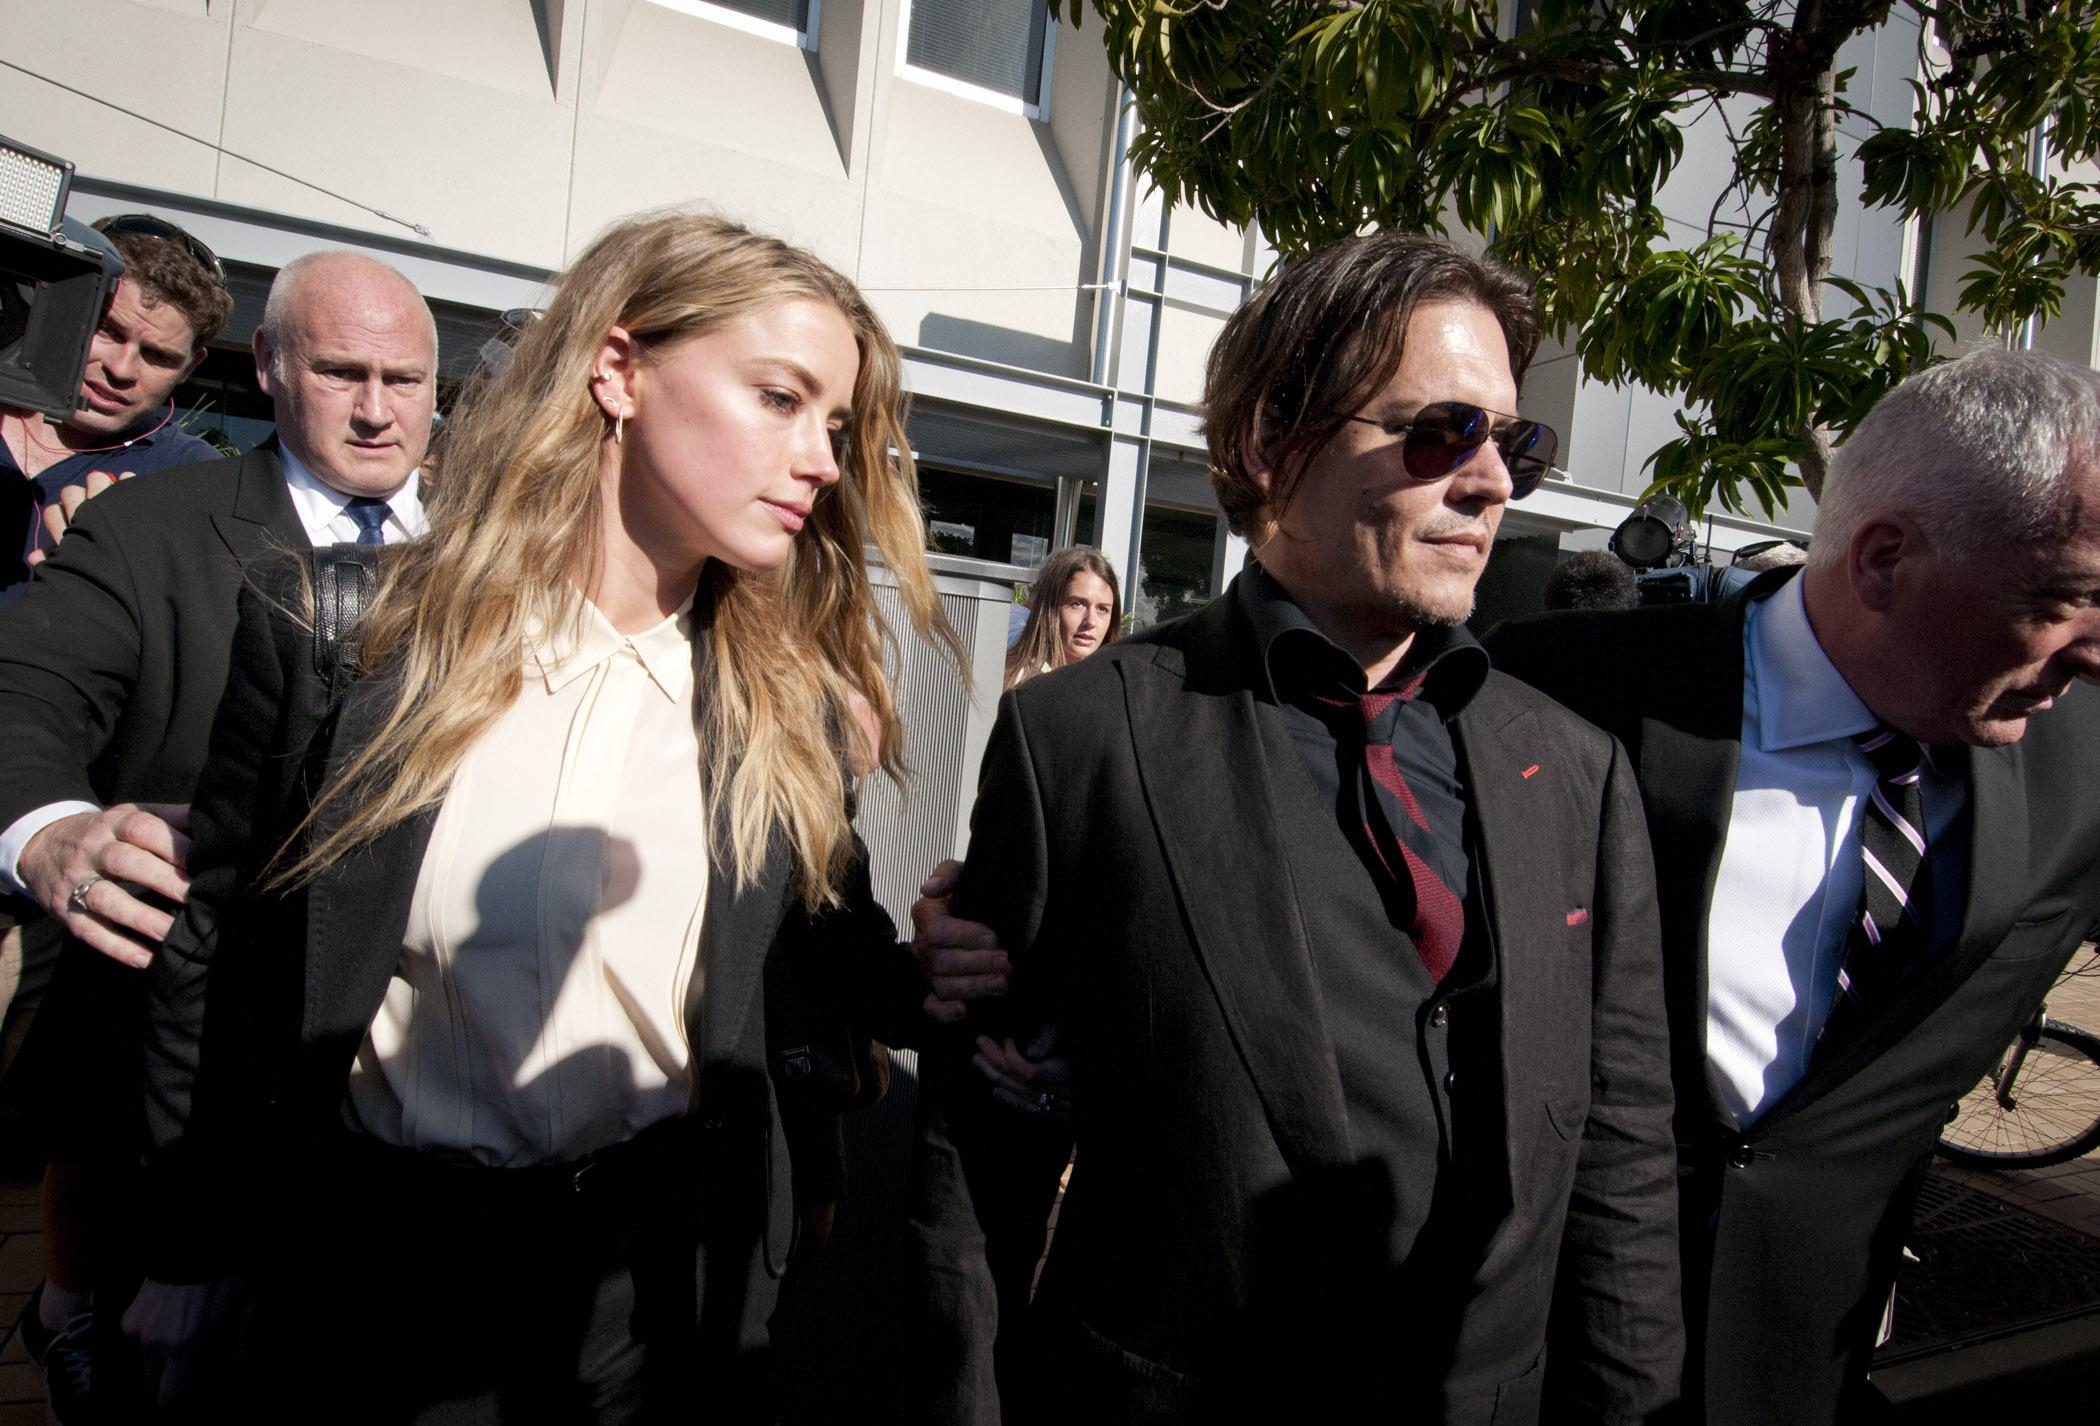 Amber Heard’s ‘Friend’ Goes on the Record: ‘I Never Saw Amber Injured in Any Way’ at the Hands of Johnny Depp